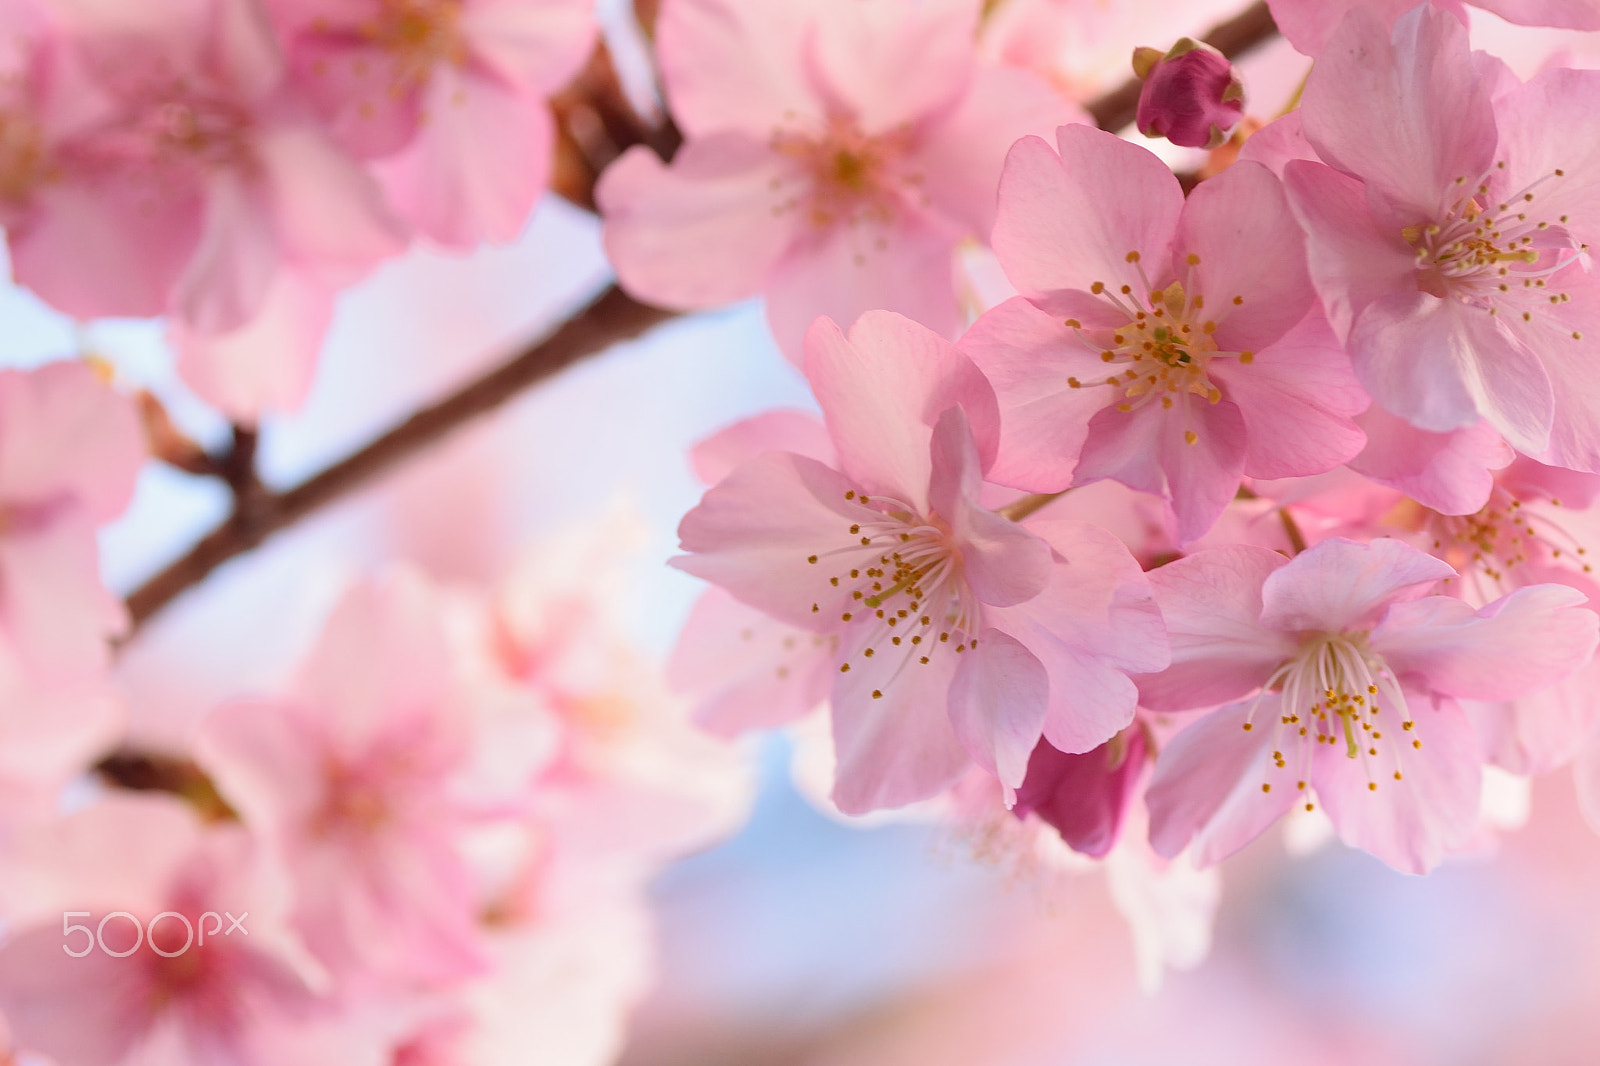 Nikon D5300 sample photo. Pink cherry blossoms at full bloom photography